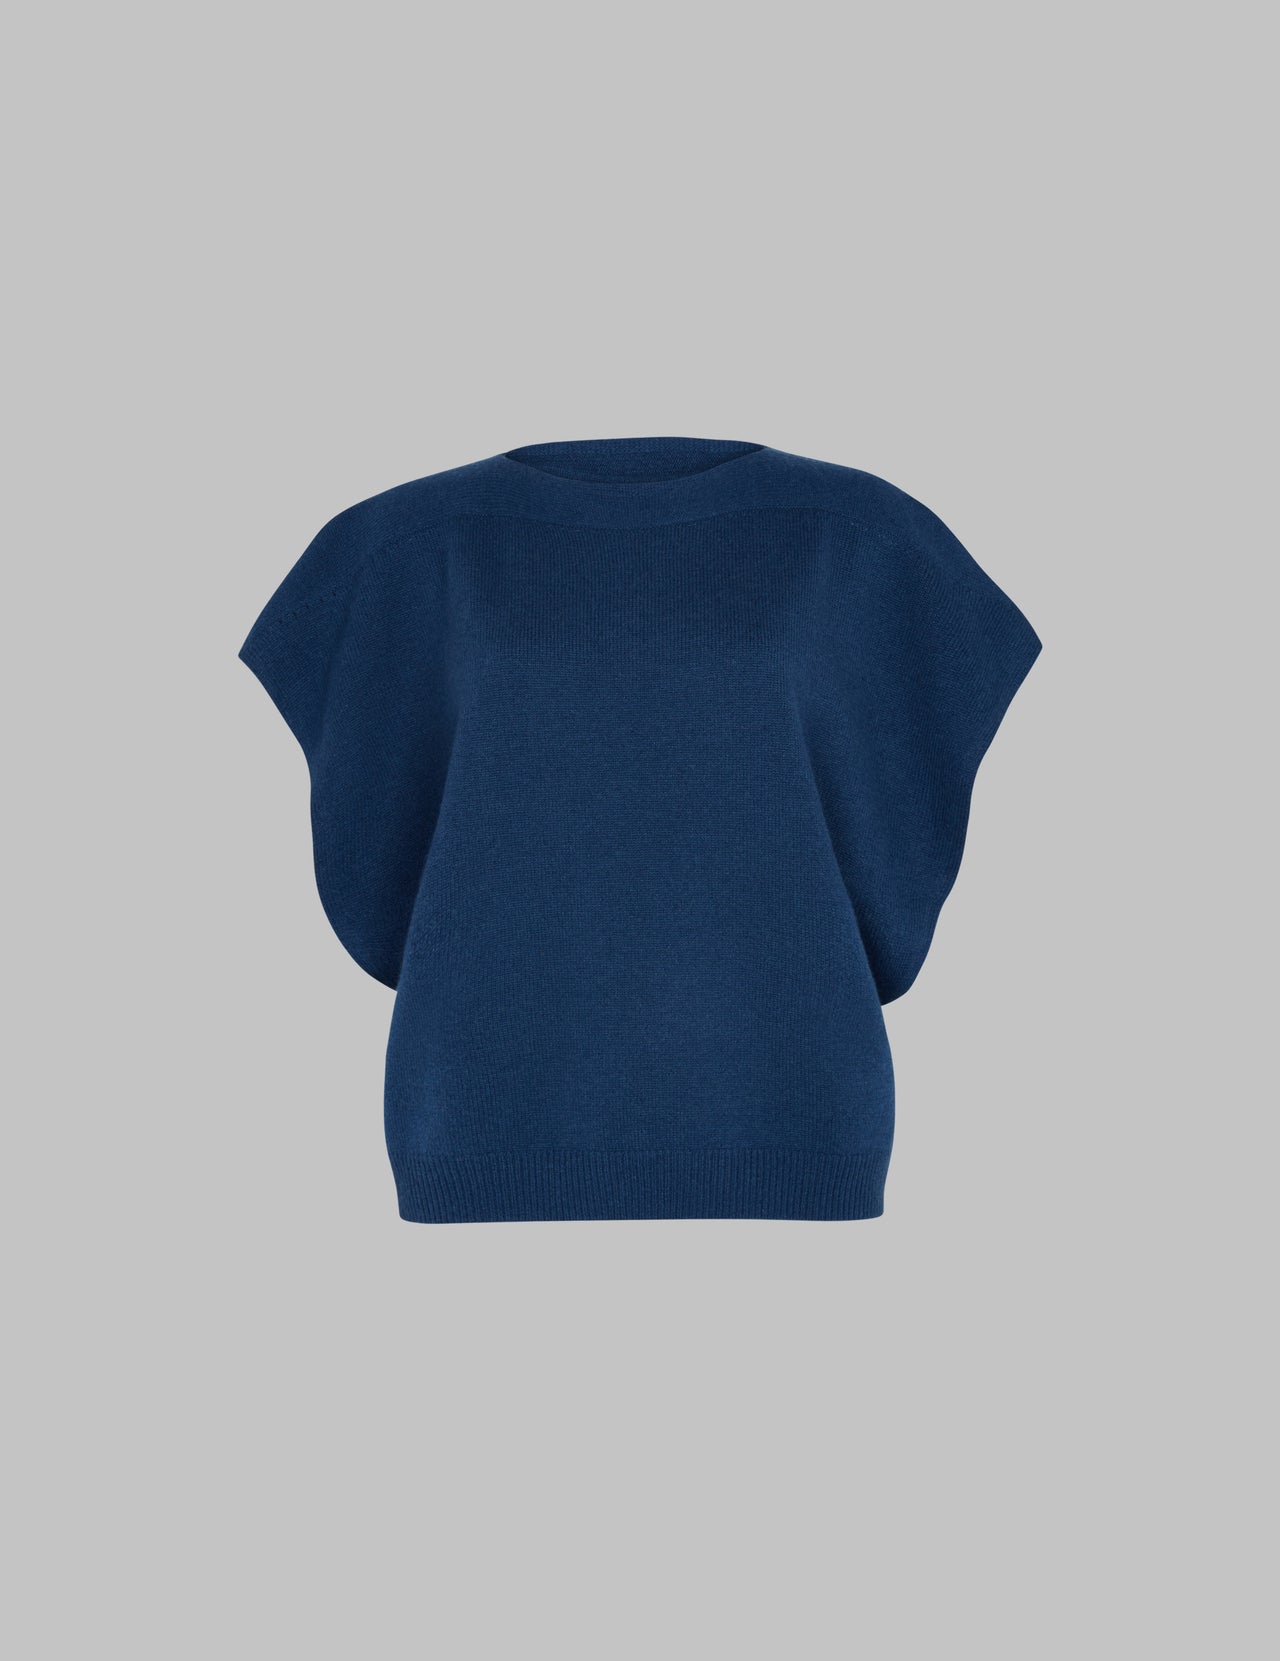  Prussian Blue Cashmere Boat Neck Top  